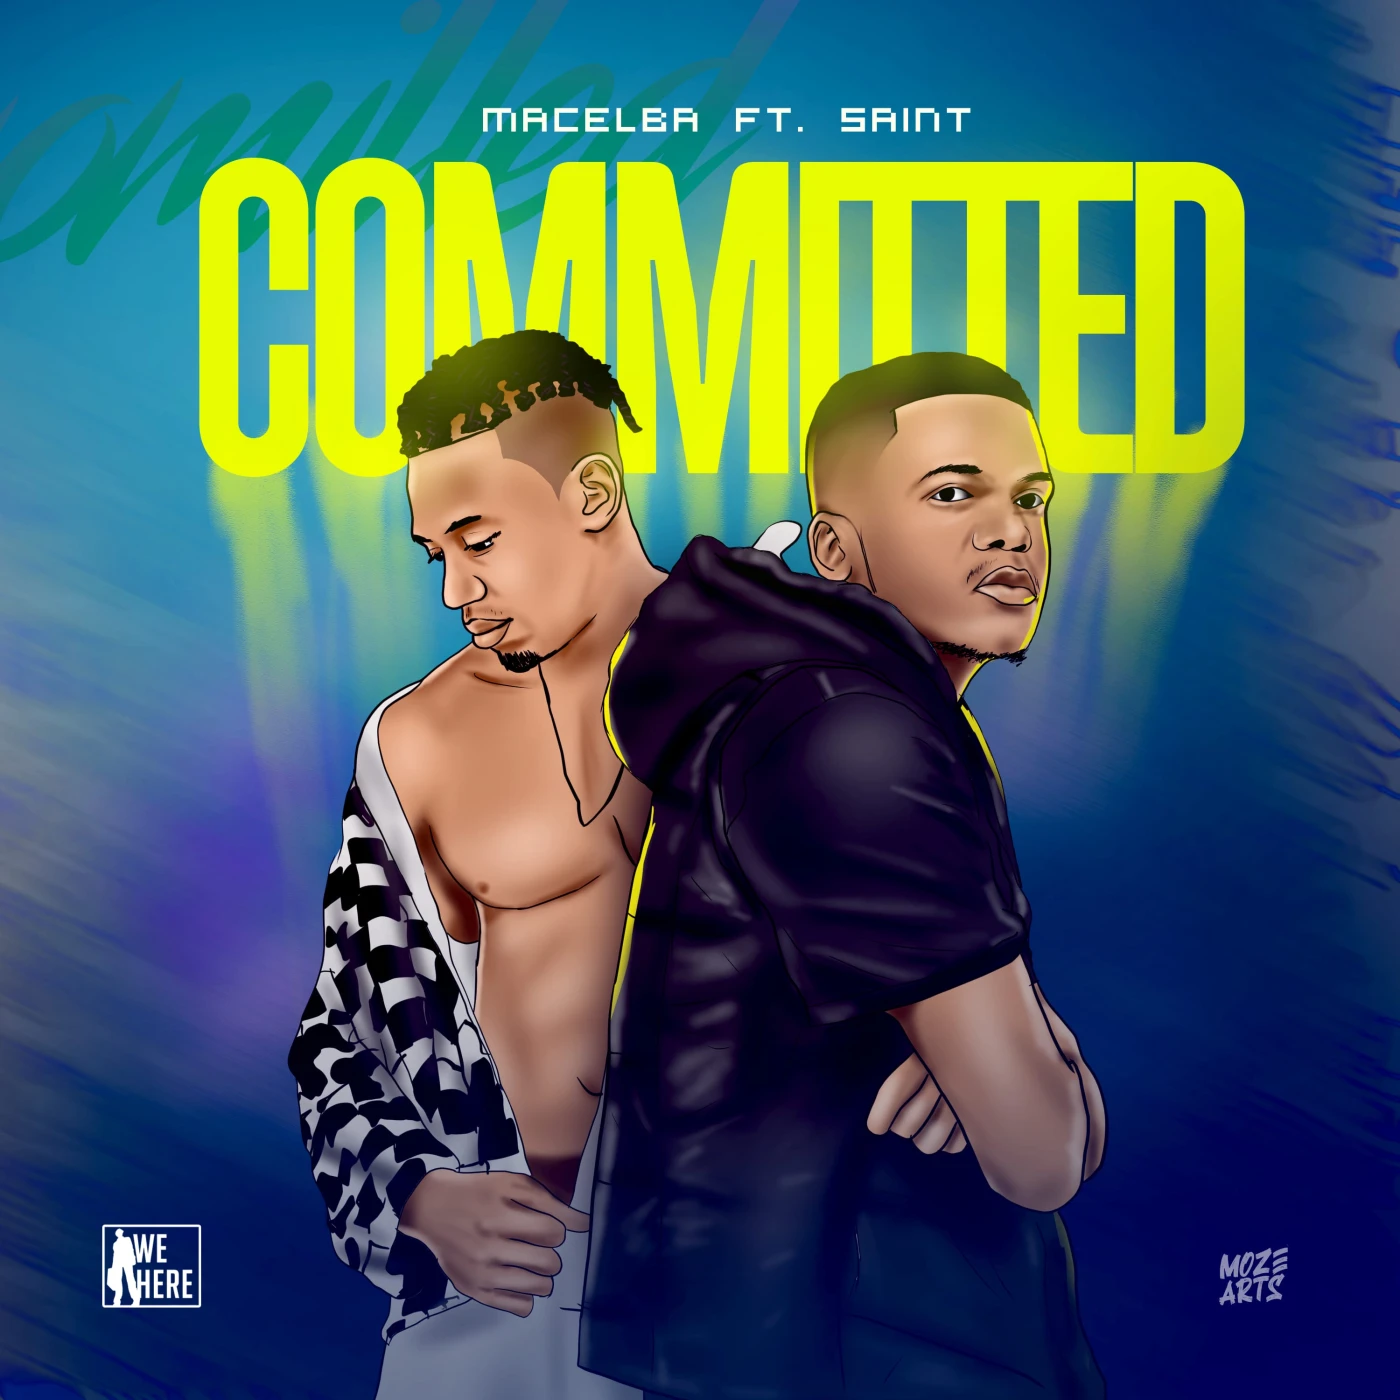 committed-feat-saint-macelba